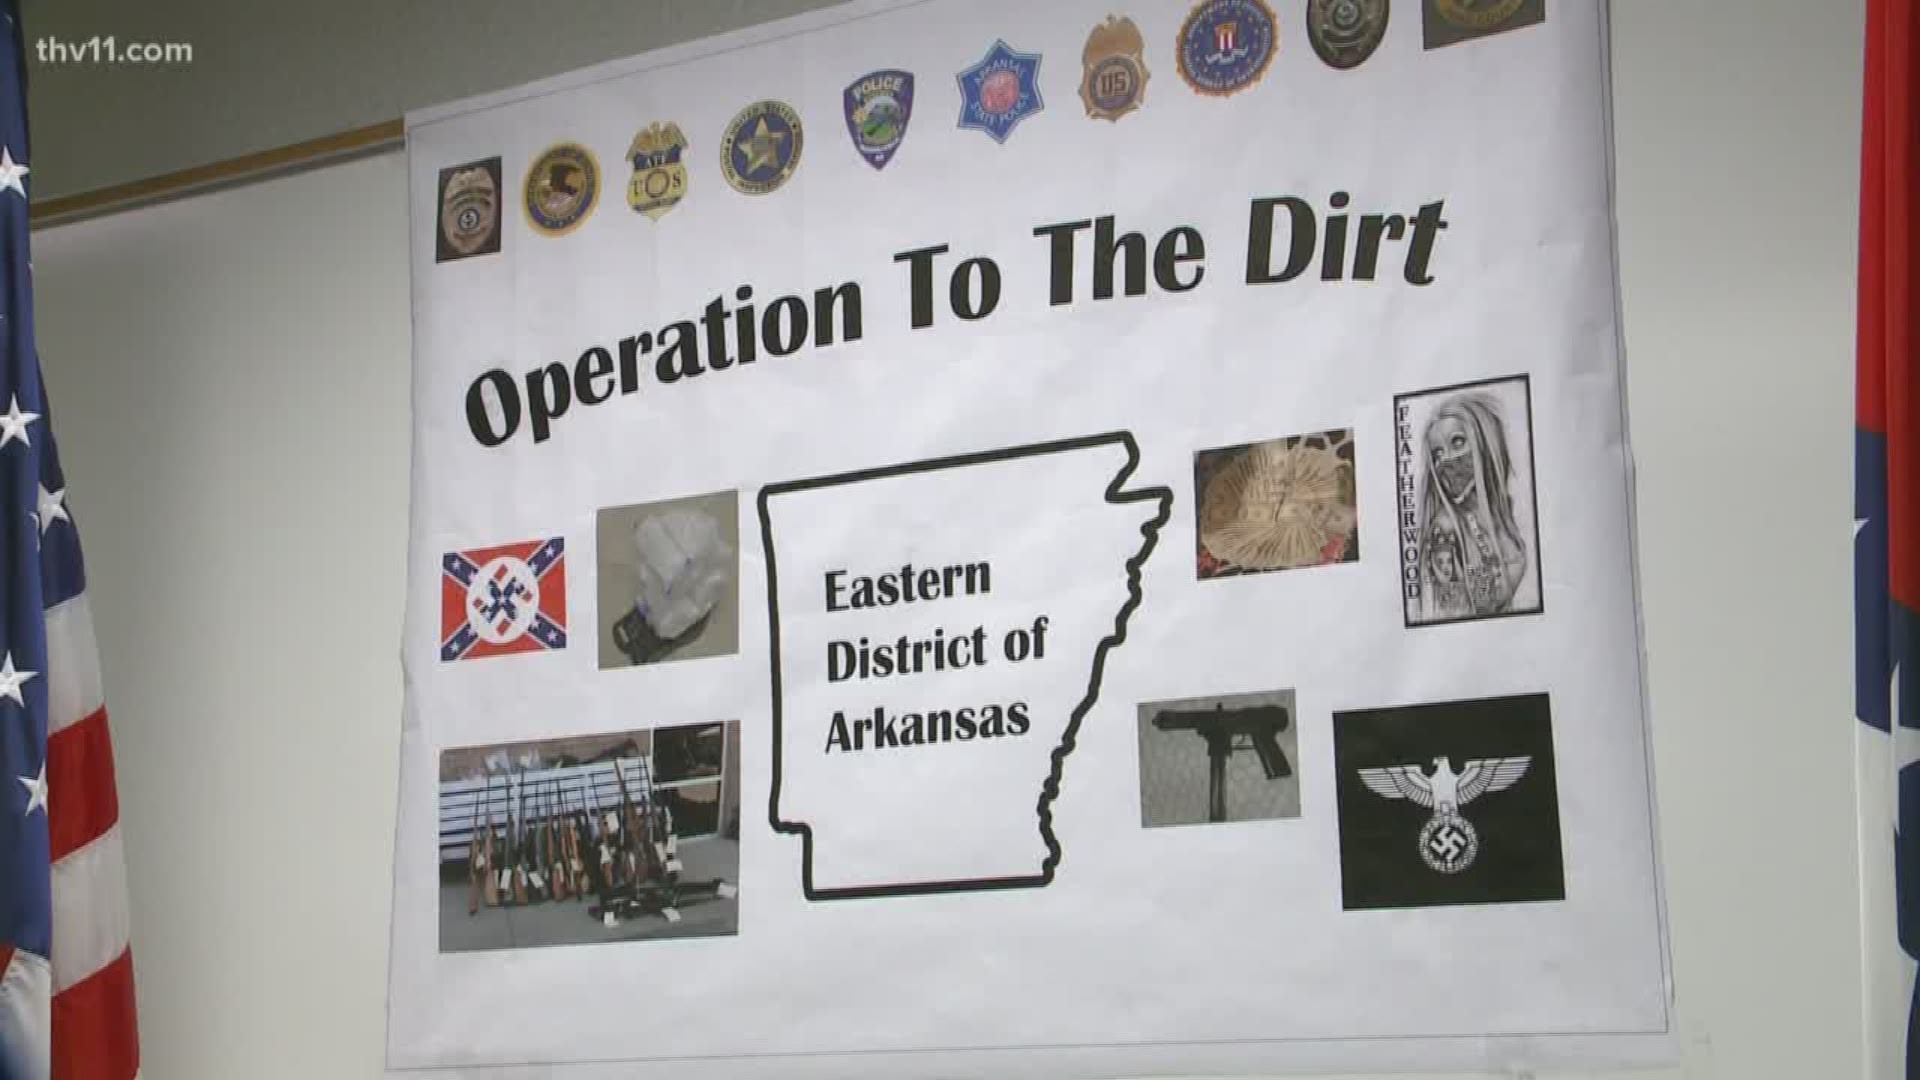 54 members of the New Aryan Empire have been indicted -- some for selling drugs, some for widespread, violent conspiracies.
All of them, prosecutors say, posed a serious threat to the Arkansas River Valley.